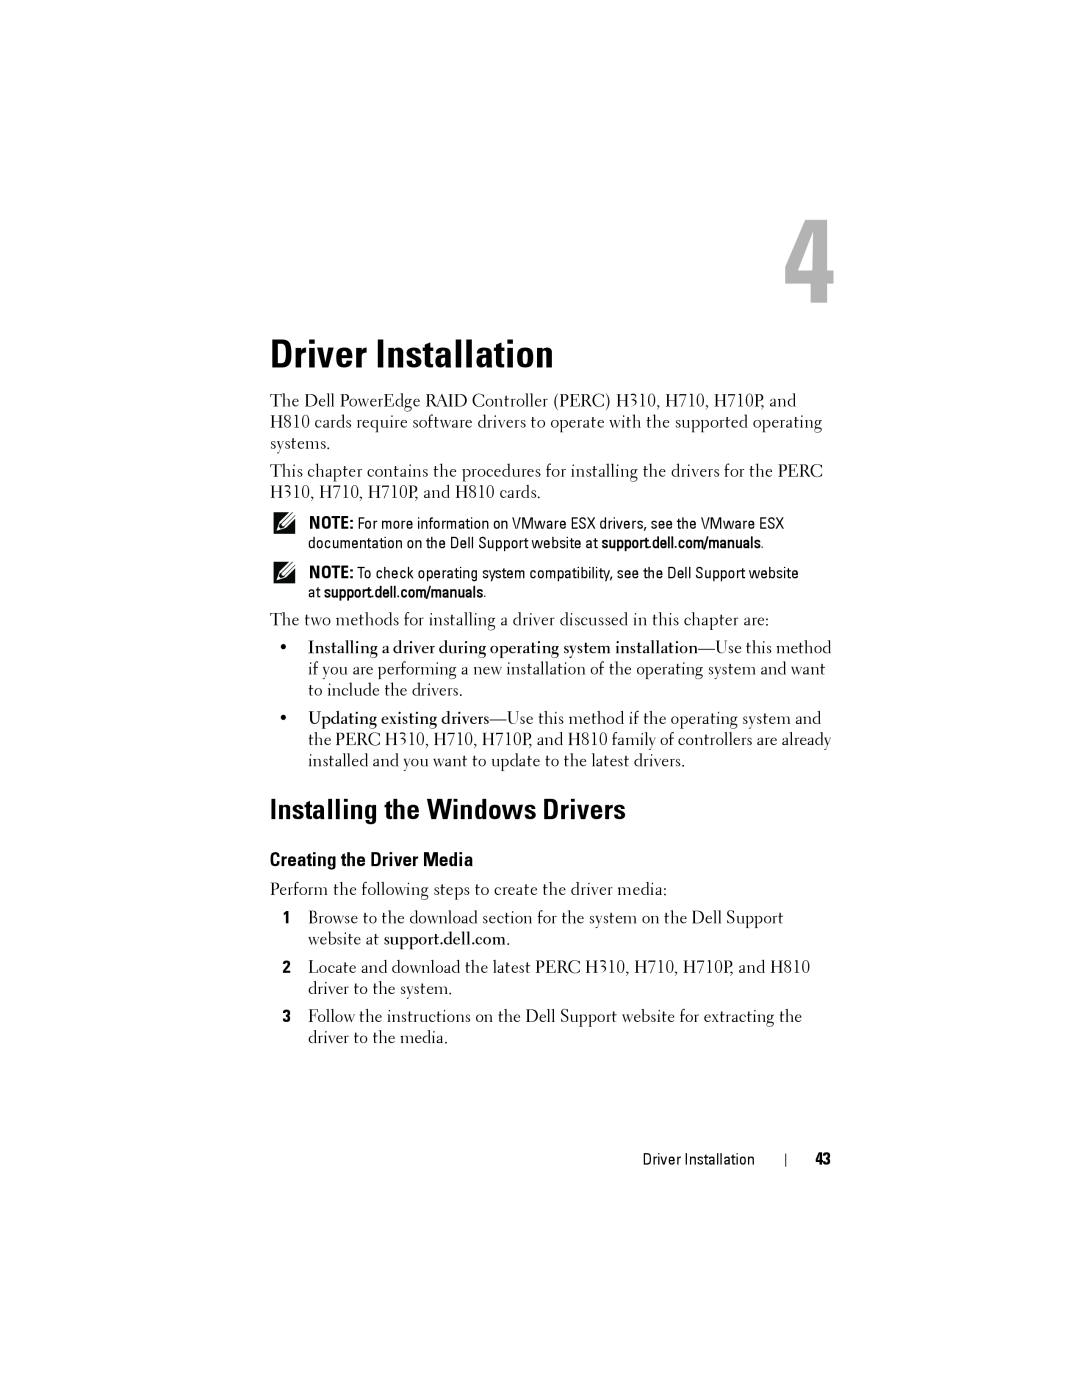 Dell H810, H710P, H310 manual Driver Installation, Installing the Windows Drivers, Creating the Driver Media 